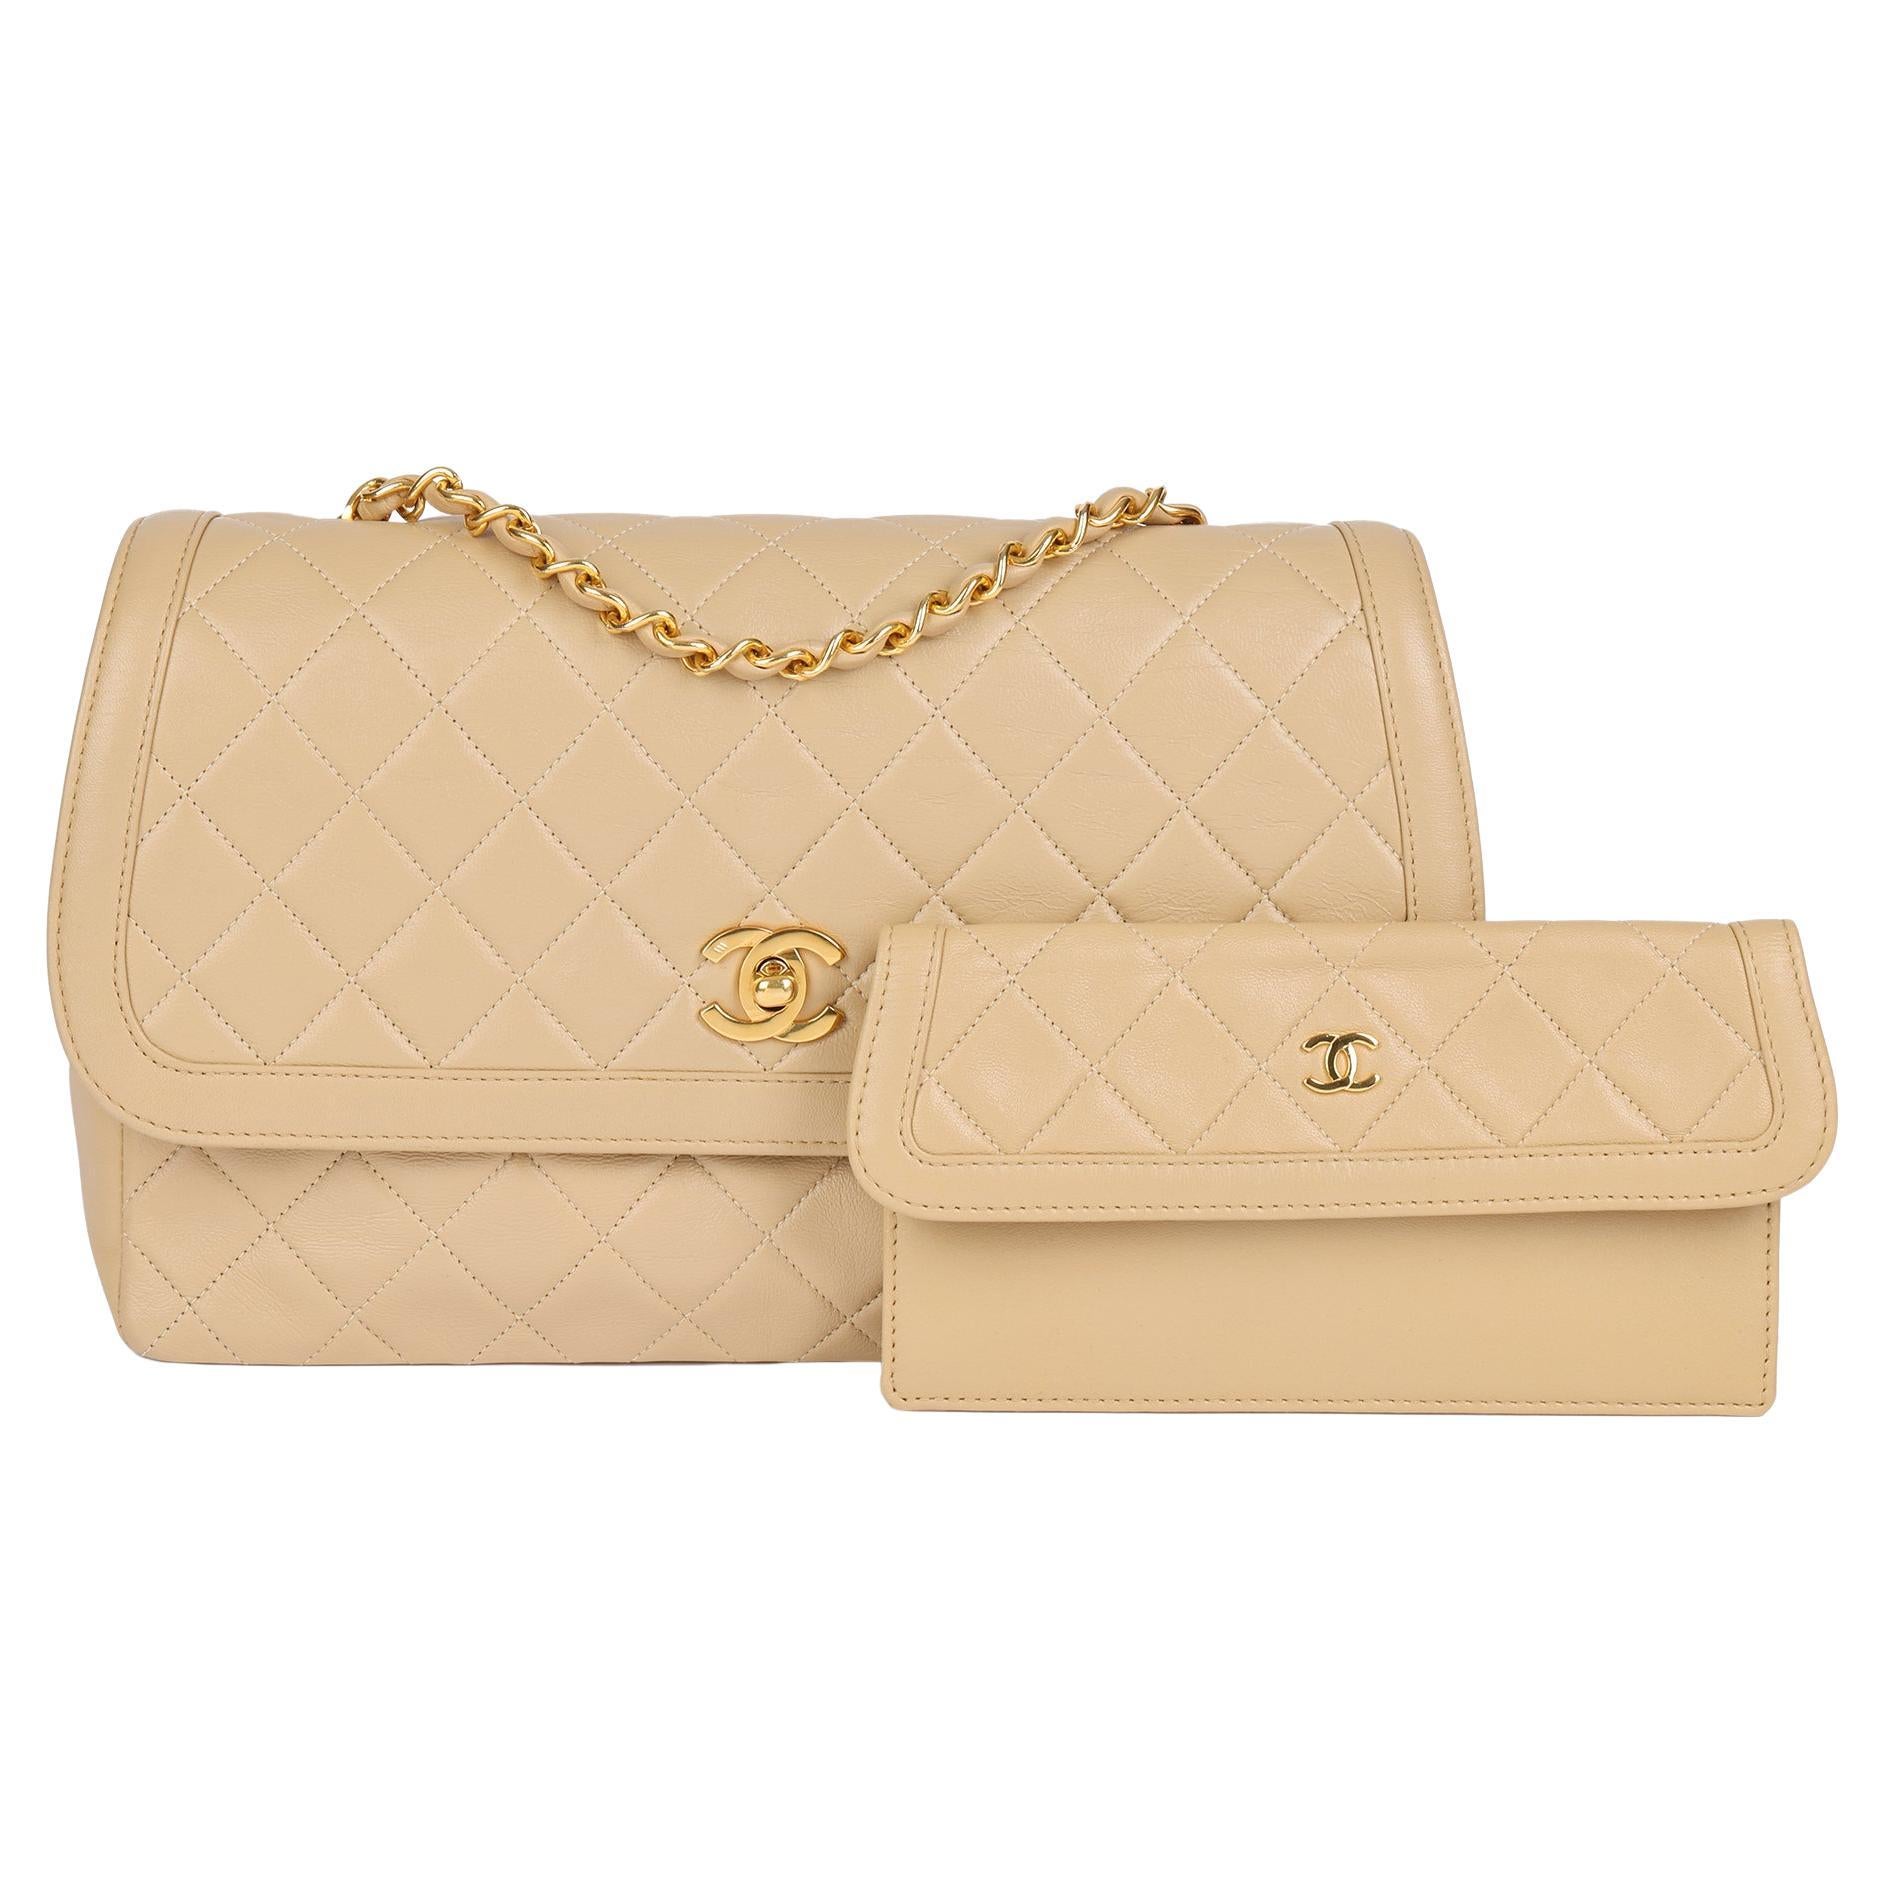 CHANEL Beige Quilted Lambskin Vintage Medium Classic Single Flap Bag with Wallet